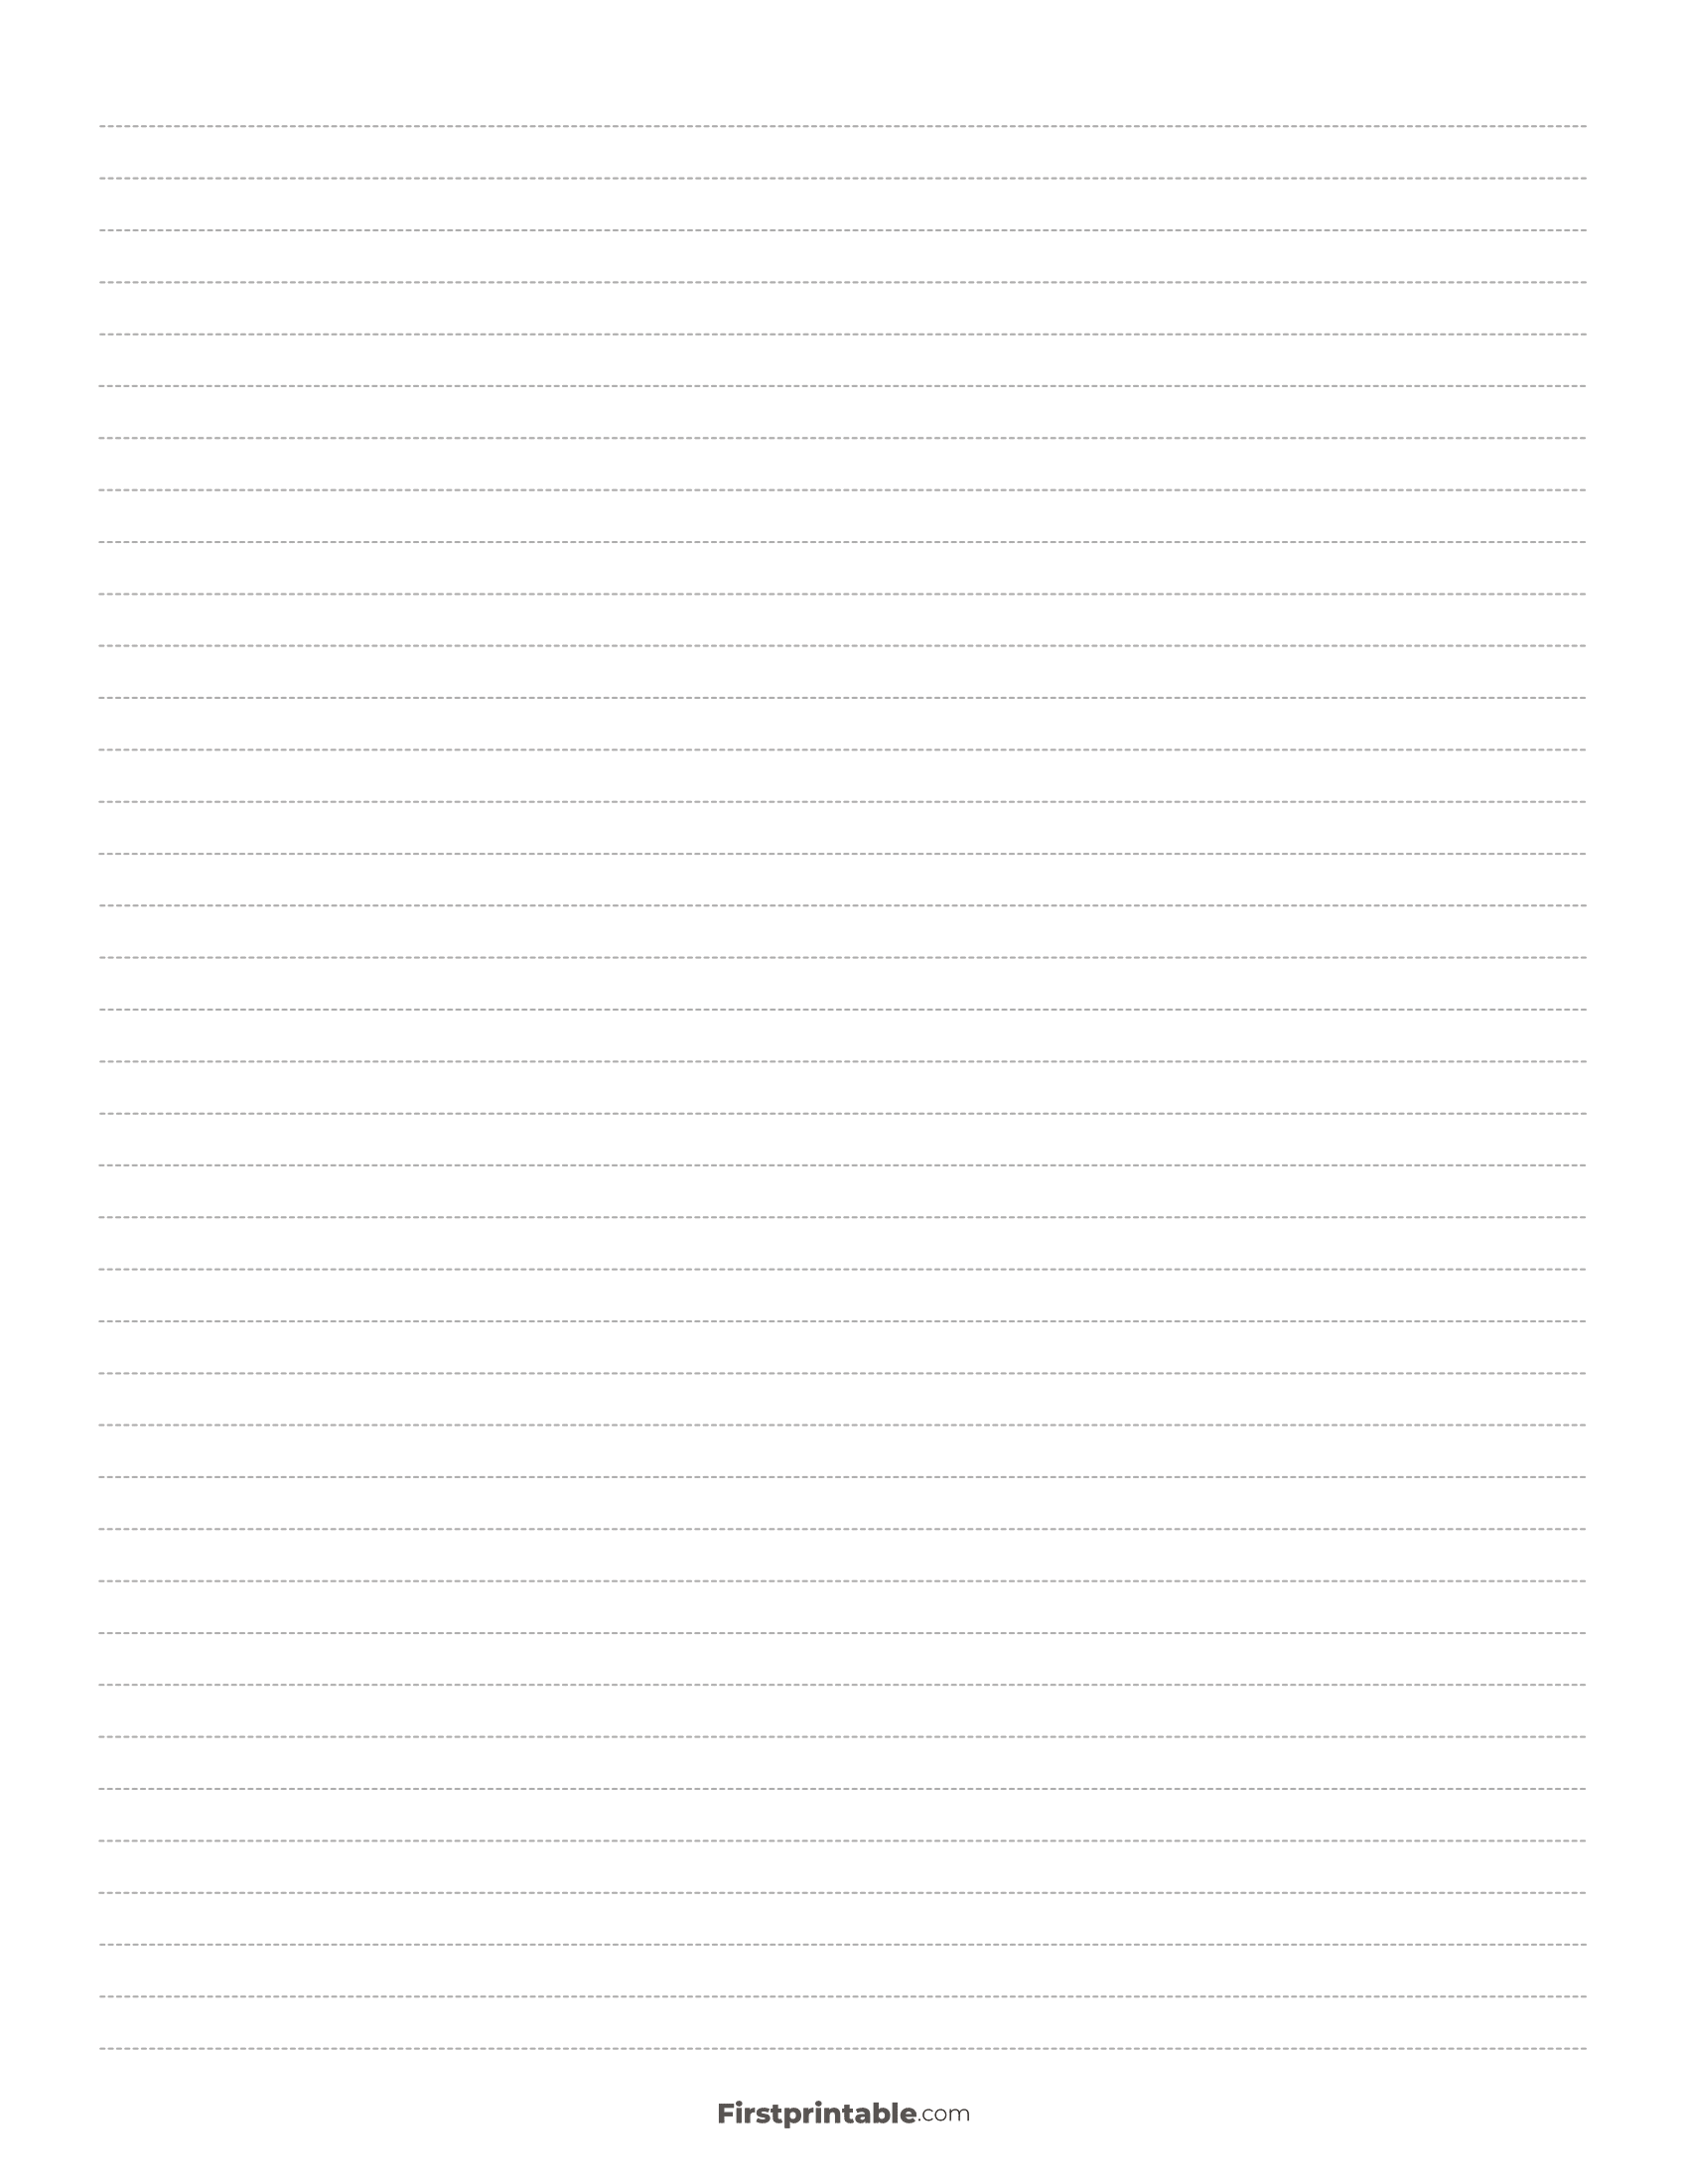 Printable Dash Lined Paper Template - Narrow Ruled